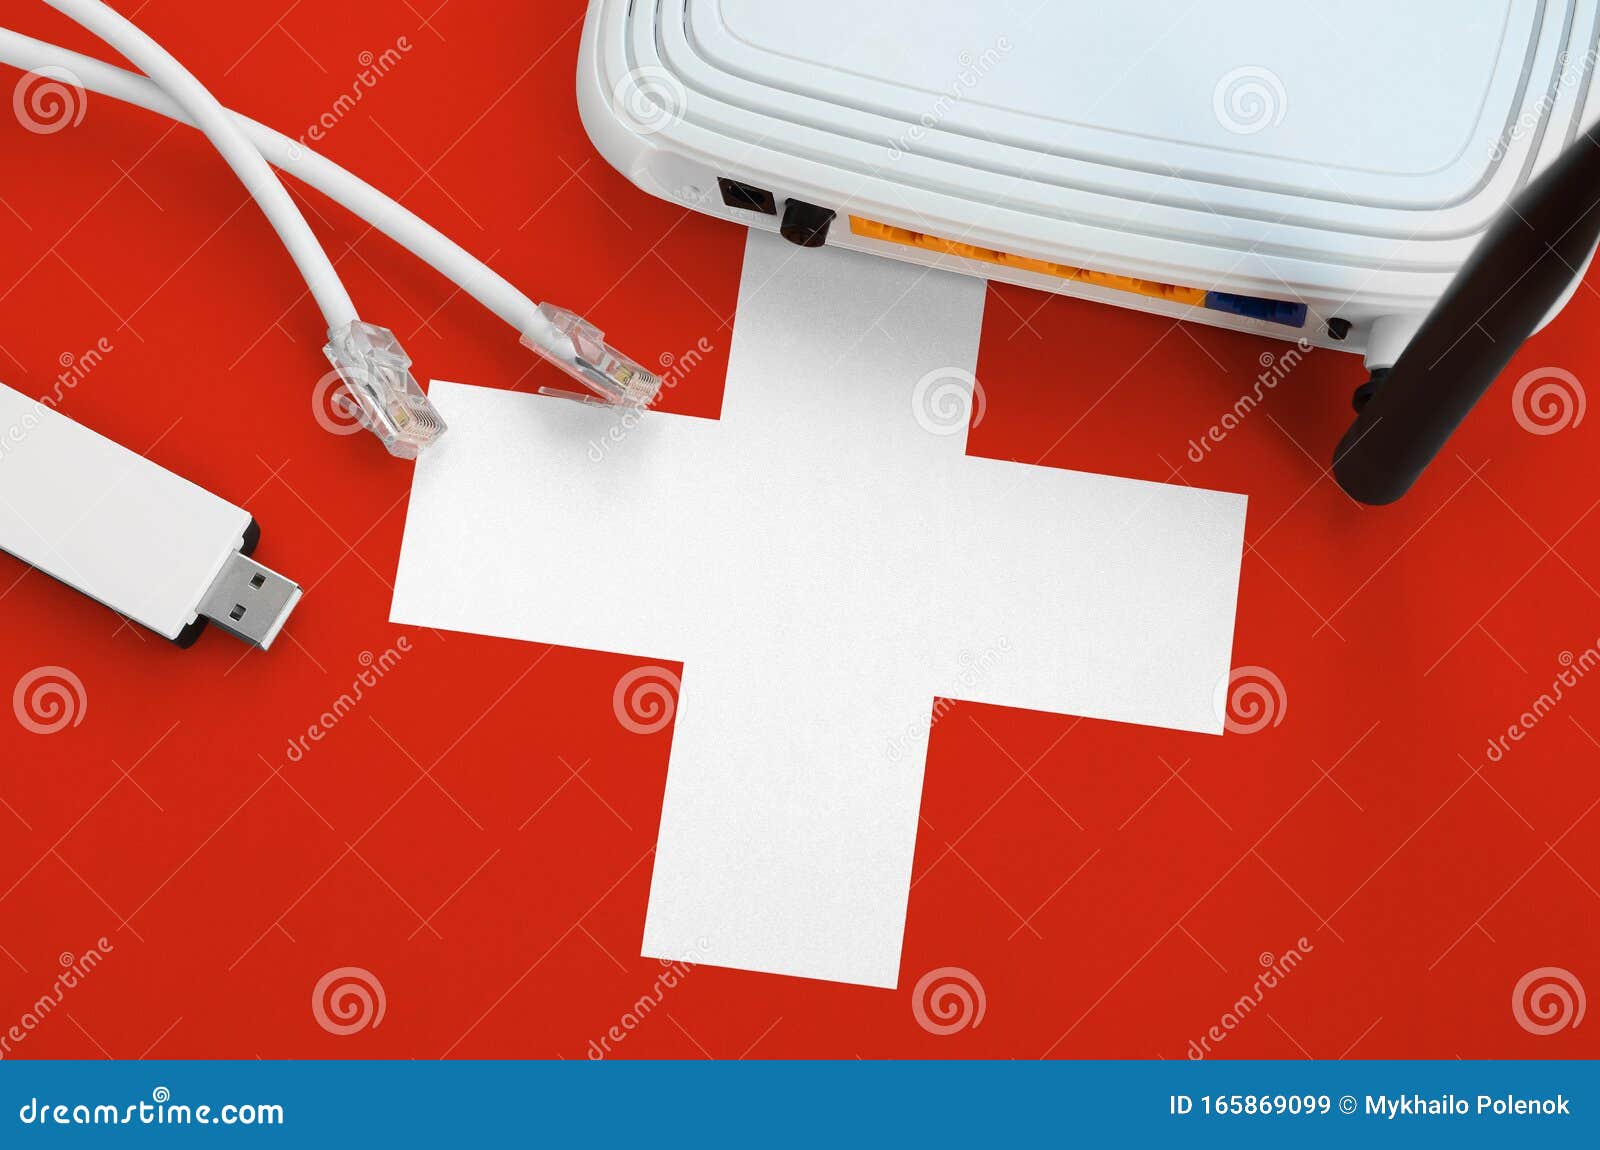 Switzerland Wifi Photos - Free & Royalty-Free Stock Photos from Dreamstime